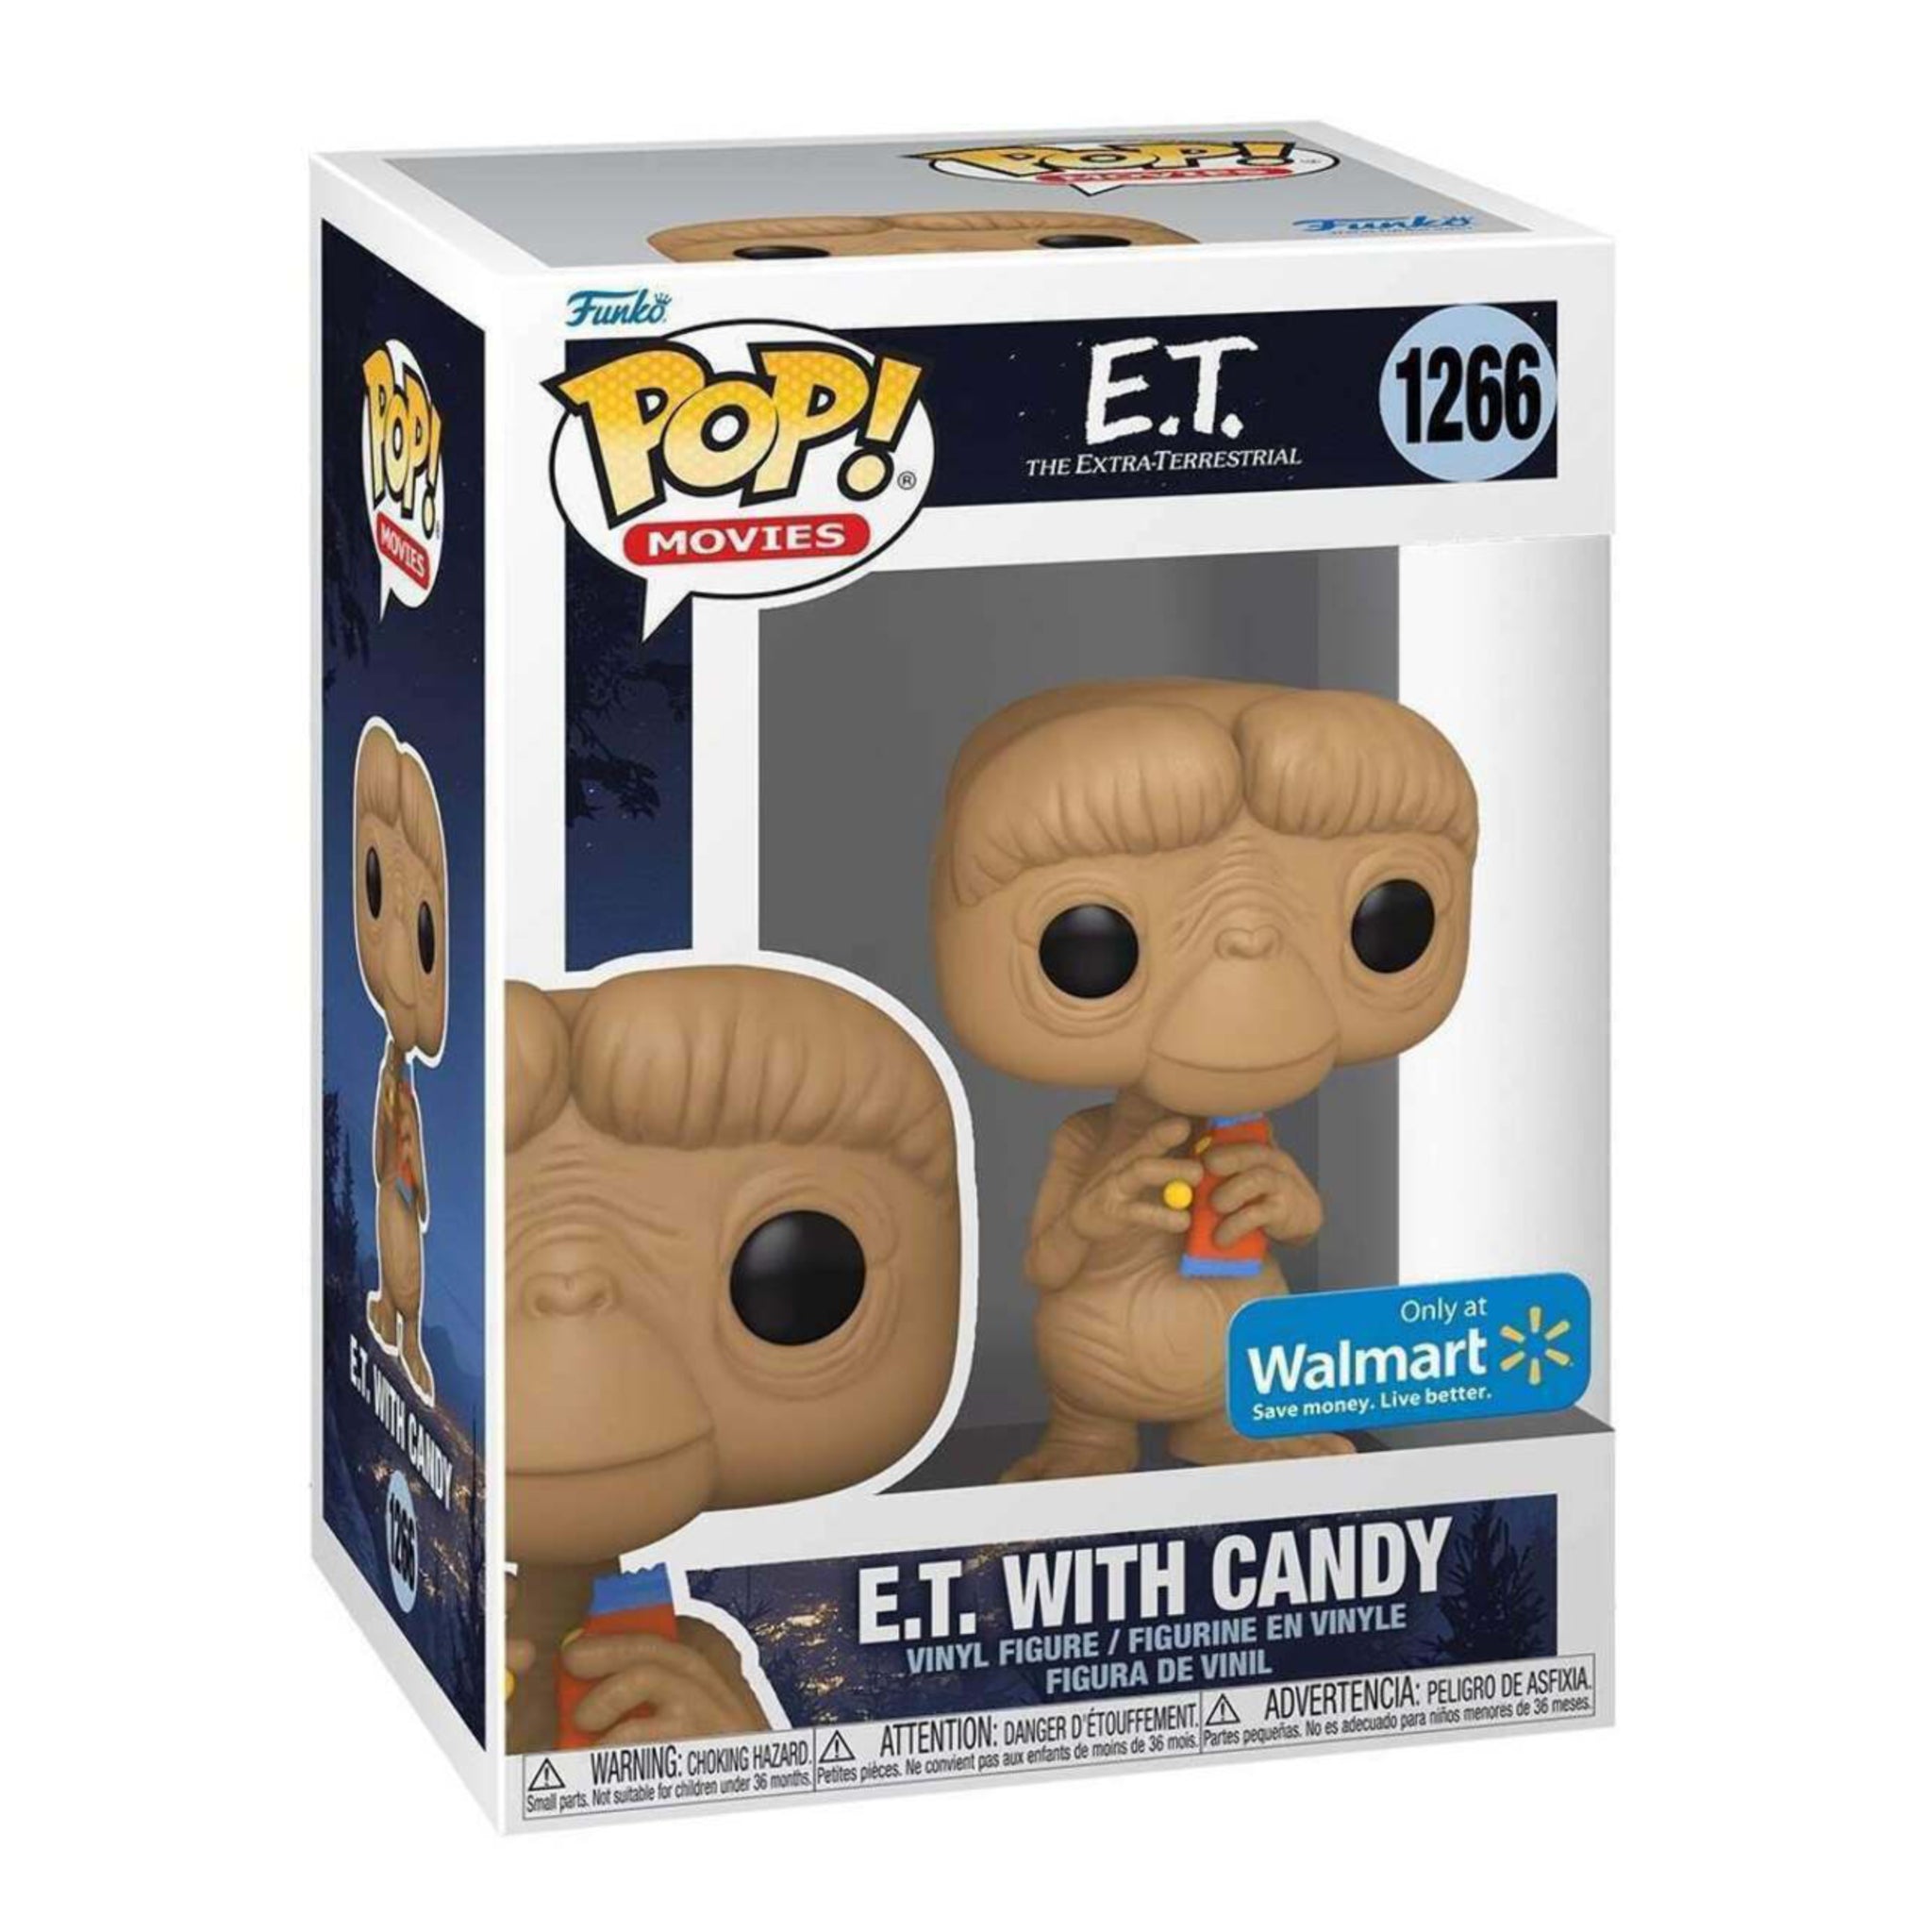 E.T. with Candy Funko Pop! WALMART EXCLUSIVE